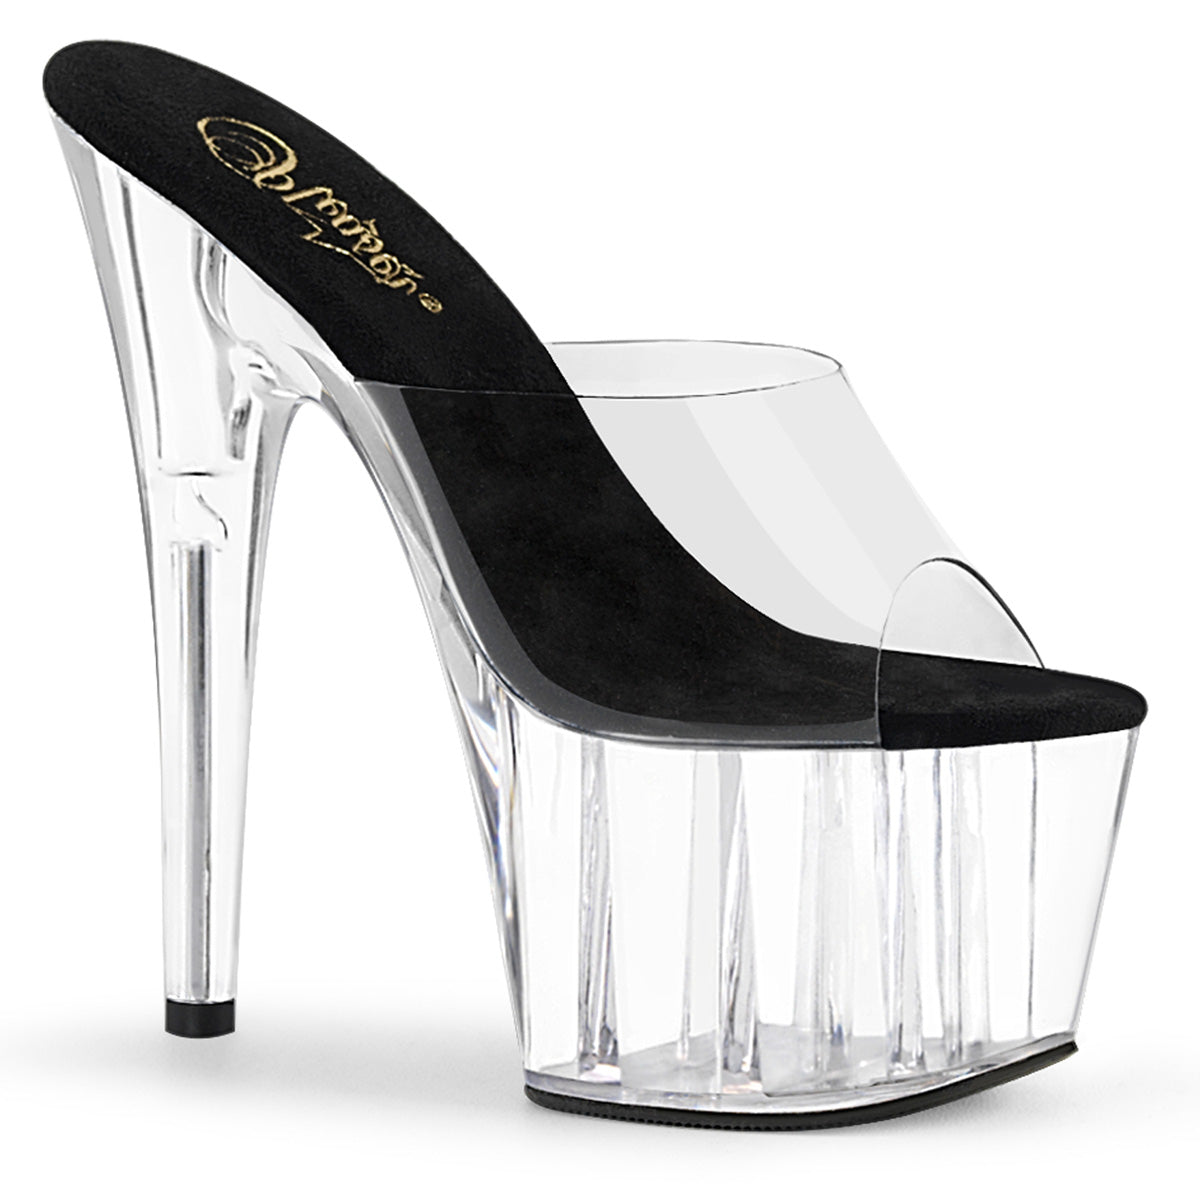 7" Heel ADORE-701 Clear Black Clear